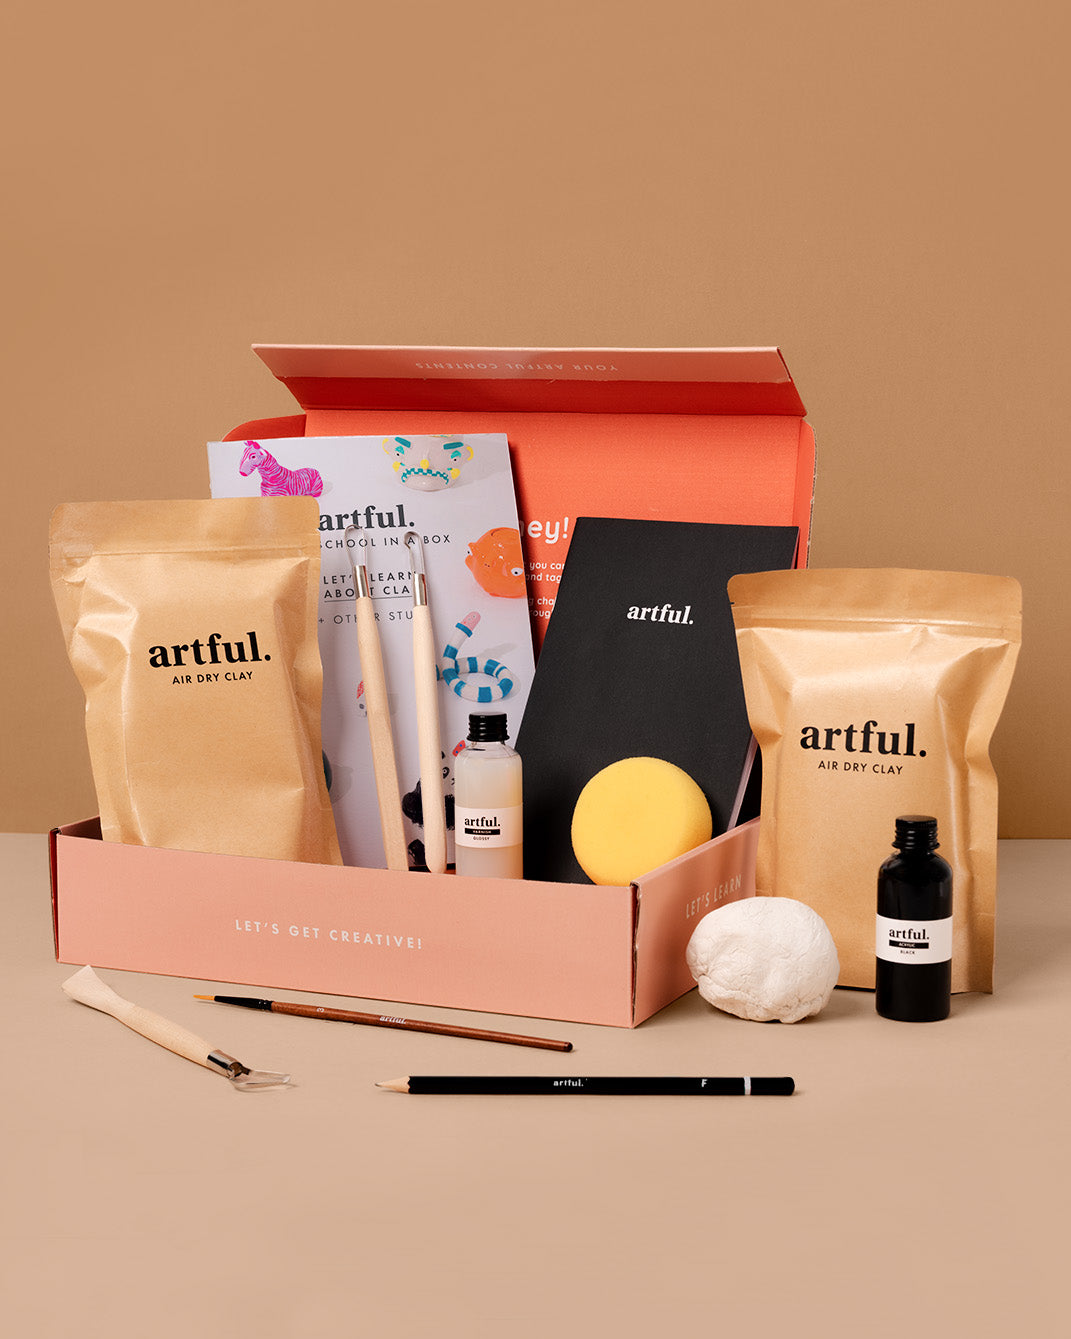 Artful Clay Edition Box and contents